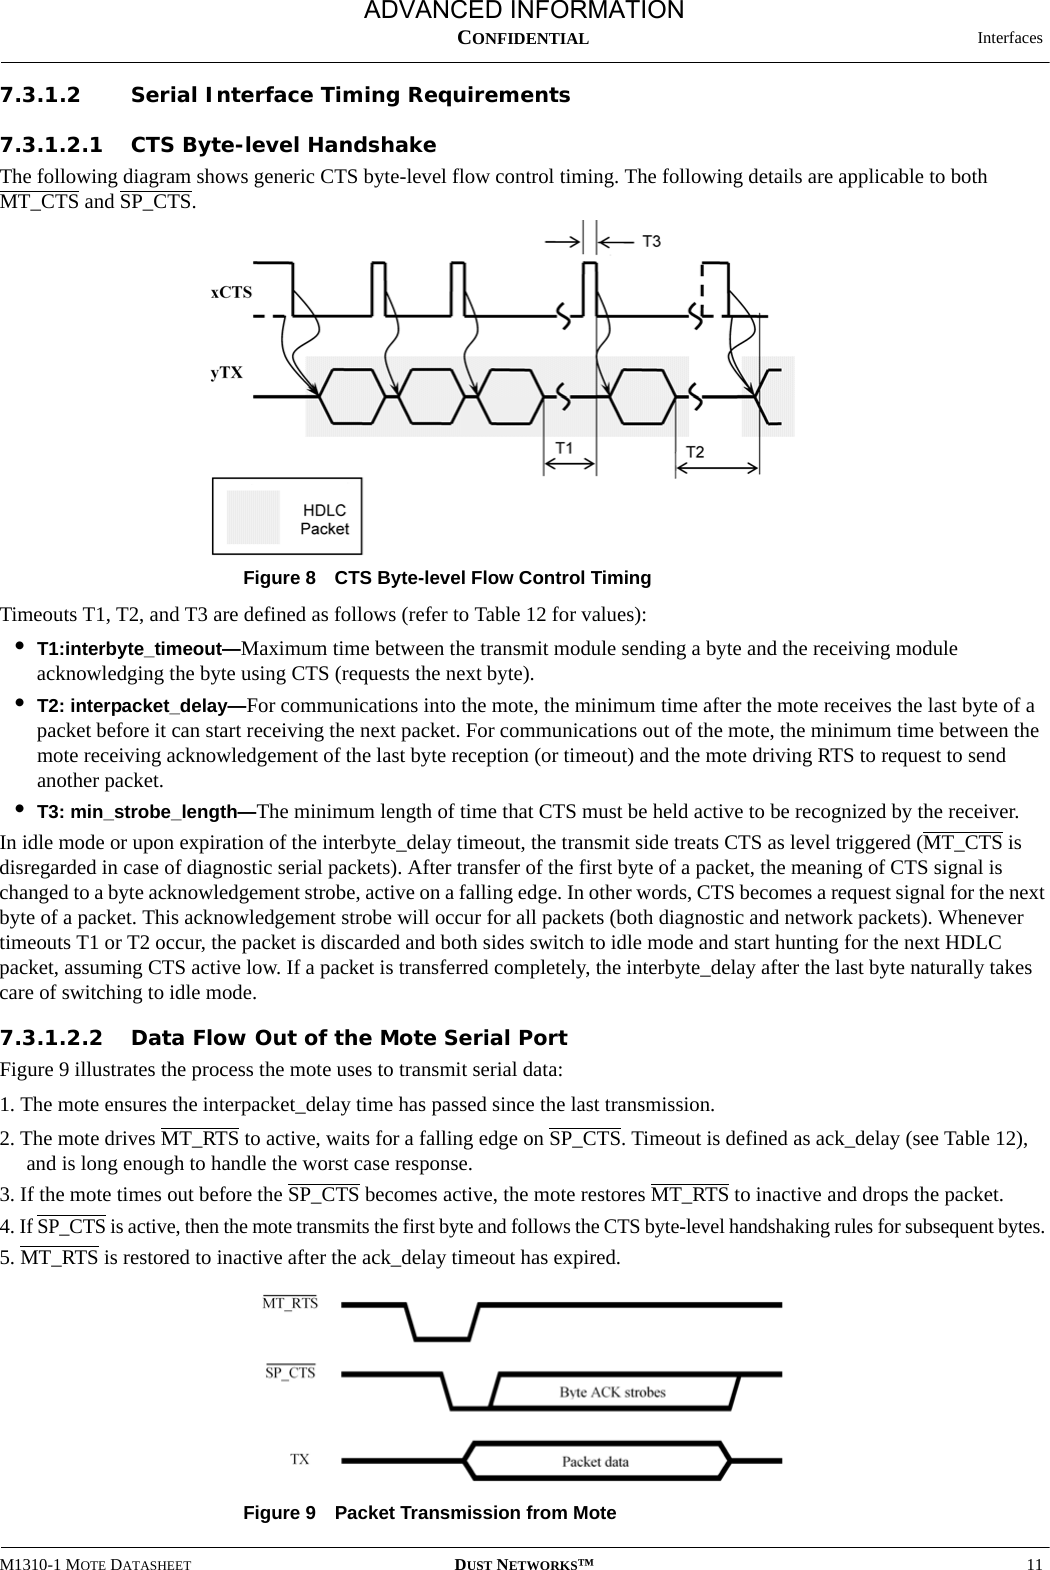  InterfacesM1310-1 MOTE DATASHEET DUST NETWORKS™11CONFIDENTIAL7.3.1.2 Serial Interface Timing Requirements7.3.1.2.1 CTS Byte-level HandshakeThe following diagram shows generic CTS byte-level flow control timing. The following details are applicable to both MT_CTS and SP_CTS.Figure 8  CTS Byte-level Flow Control TimingTimeouts T1, T2, and T3 are defined as follows (refer to Table 12 for values):•T1:interbyte_timeout—Maximum time between the transmit module sending a byte and the receiving module acknowledging the byte using CTS (requests the next byte).•T2: interpacket_delay—For communications into the mote, the minimum time after the mote receives the last byte of a packet before it can start receiving the next packet. For communications out of the mote, the minimum time between the mote receiving acknowledgement of the last byte reception (or timeout) and the mote driving RTS to request to send another packet.•T3: min_strobe_length—The minimum length of time that CTS must be held active to be recognized by the receiver.In idle mode or upon expiration of the interbyte_delay timeout, the transmit side treats CTS as level triggered (MT_CTS is disregarded in case of diagnostic serial packets). After transfer of the first byte of a packet, the meaning of CTS signal is changed to a byte acknowledgement strobe, active on a falling edge. In other words, CTS becomes a request signal for the next byte of a packet. This acknowledgement strobe will occur for all packets (both diagnostic and network packets). Whenever timeouts T1 or T2 occur, the packet is discarded and both sides switch to idle mode and start hunting for the next HDLC packet, assuming CTS active low. If a packet is transferred completely, the interbyte_delay after the last byte naturally takes care of switching to idle mode.7.3.1.2.2 Data Flow Out of the Mote Serial PortFigure 9 illustrates the process the mote uses to transmit serial data: 1. The mote ensures the interpacket_delay time has passed since the last transmission.2. The mote drives MT_RTS to active, waits for a falling edge on SP_CTS. Timeout is defined as ack_delay (see Table 12), and is long enough to handle the worst case response.3. If the mote times out before the SP_CTS becomes active, the mote restores MT_RTS to inactive and drops the packet.4. If SP_CTS is active, then the mote transmits the first byte and follows the CTS byte-level handshaking rules for subsequent bytes. 5. MT_RTS is restored to inactive after the ack_delay timeout has expired. Figure 9  Packet Transmission from MoteADVANCED INFORMATION